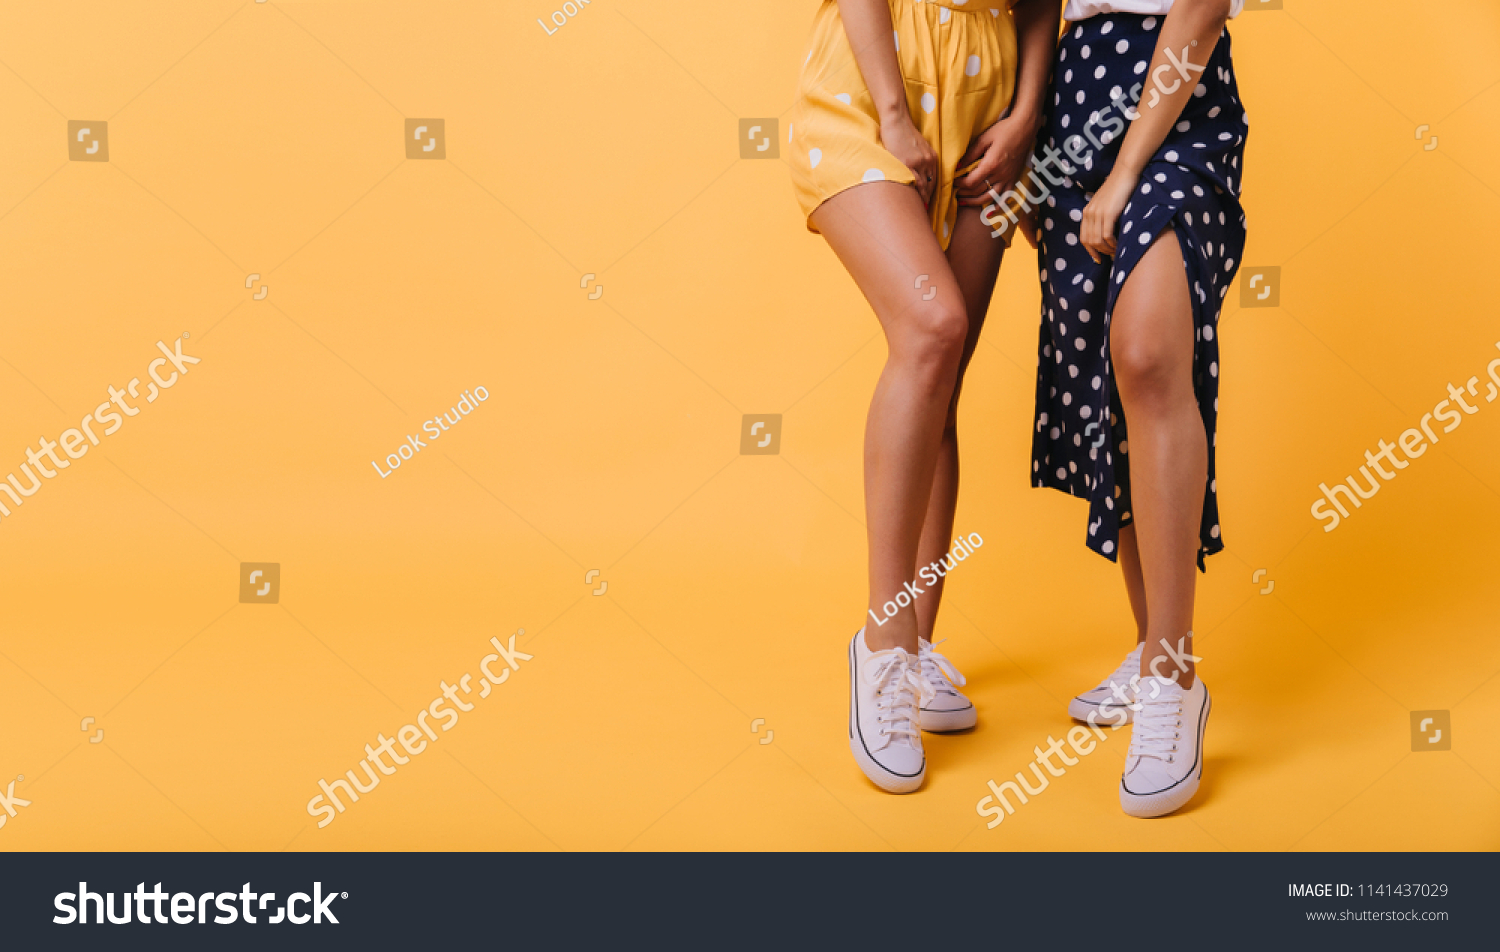 Shapely girls in white gumshoes standing on bright yellow background. Photo of female legs with tanned skin. #1141437029